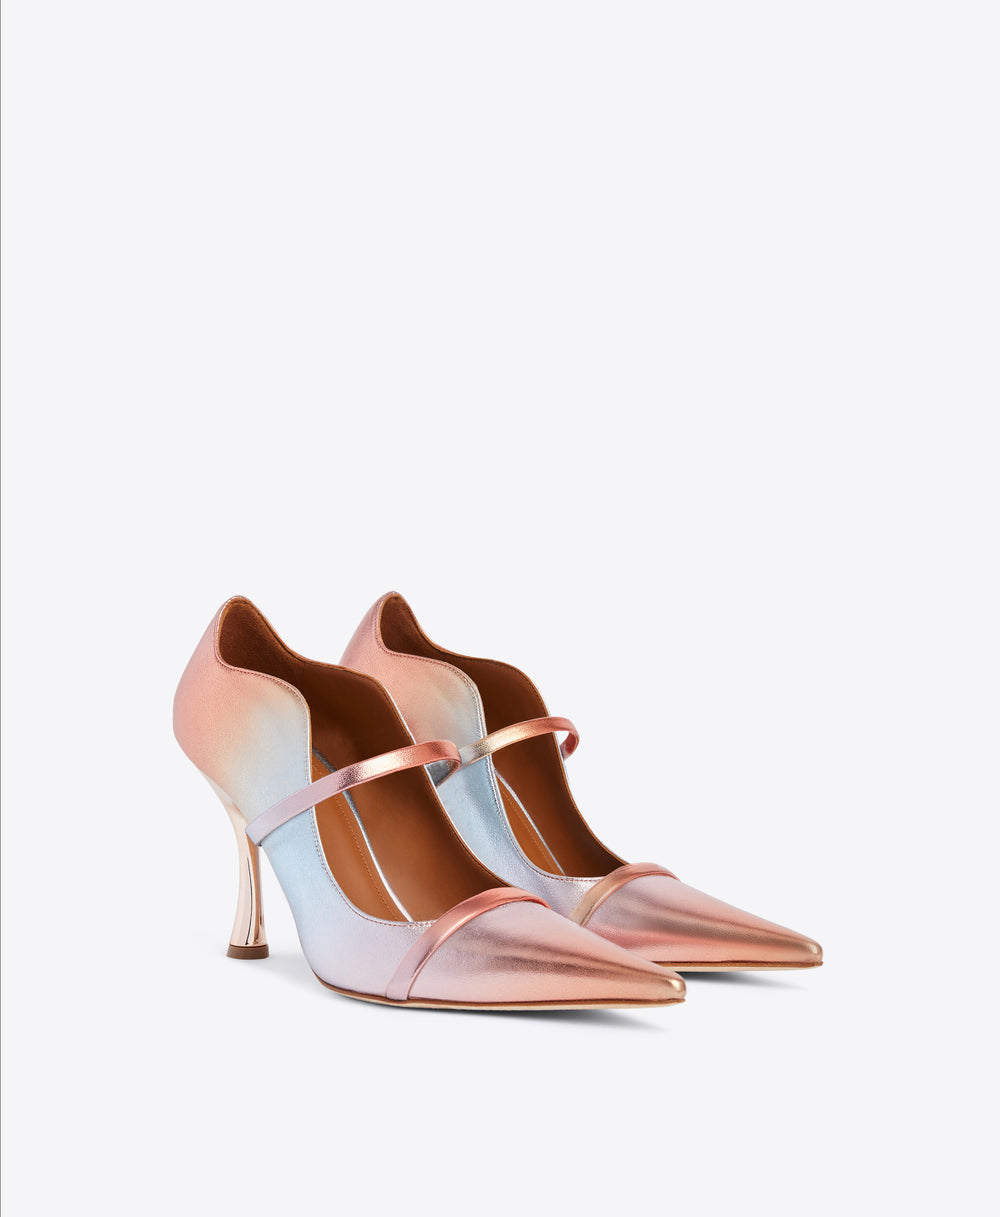 Pointed Toe Double Strap Pumps in Sunset Ombr̩ | Malone Souliers